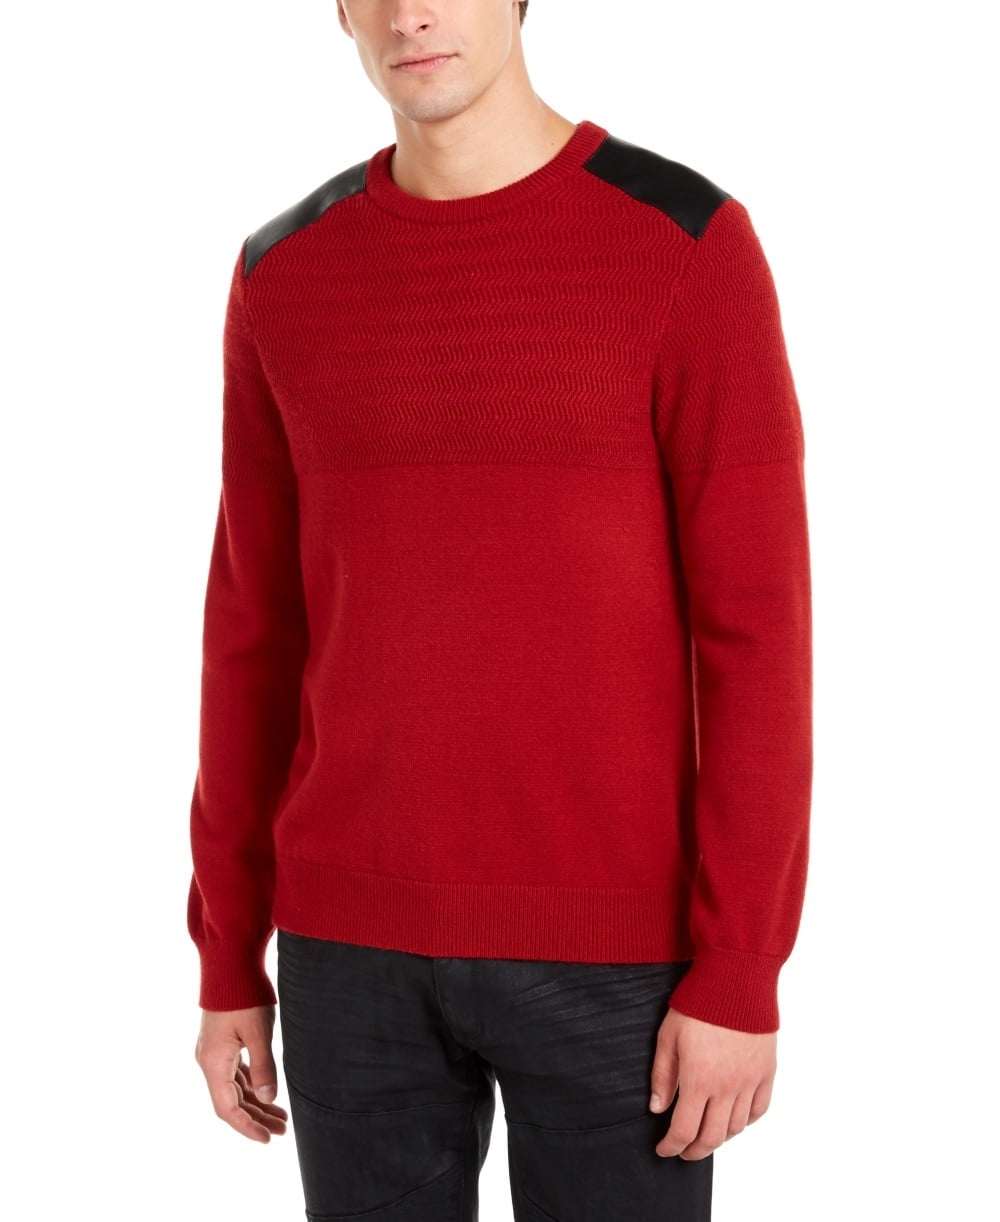 Guess Men's Herringbone Sweater Faux Leather Piecing Red Size Large - Walmart.com